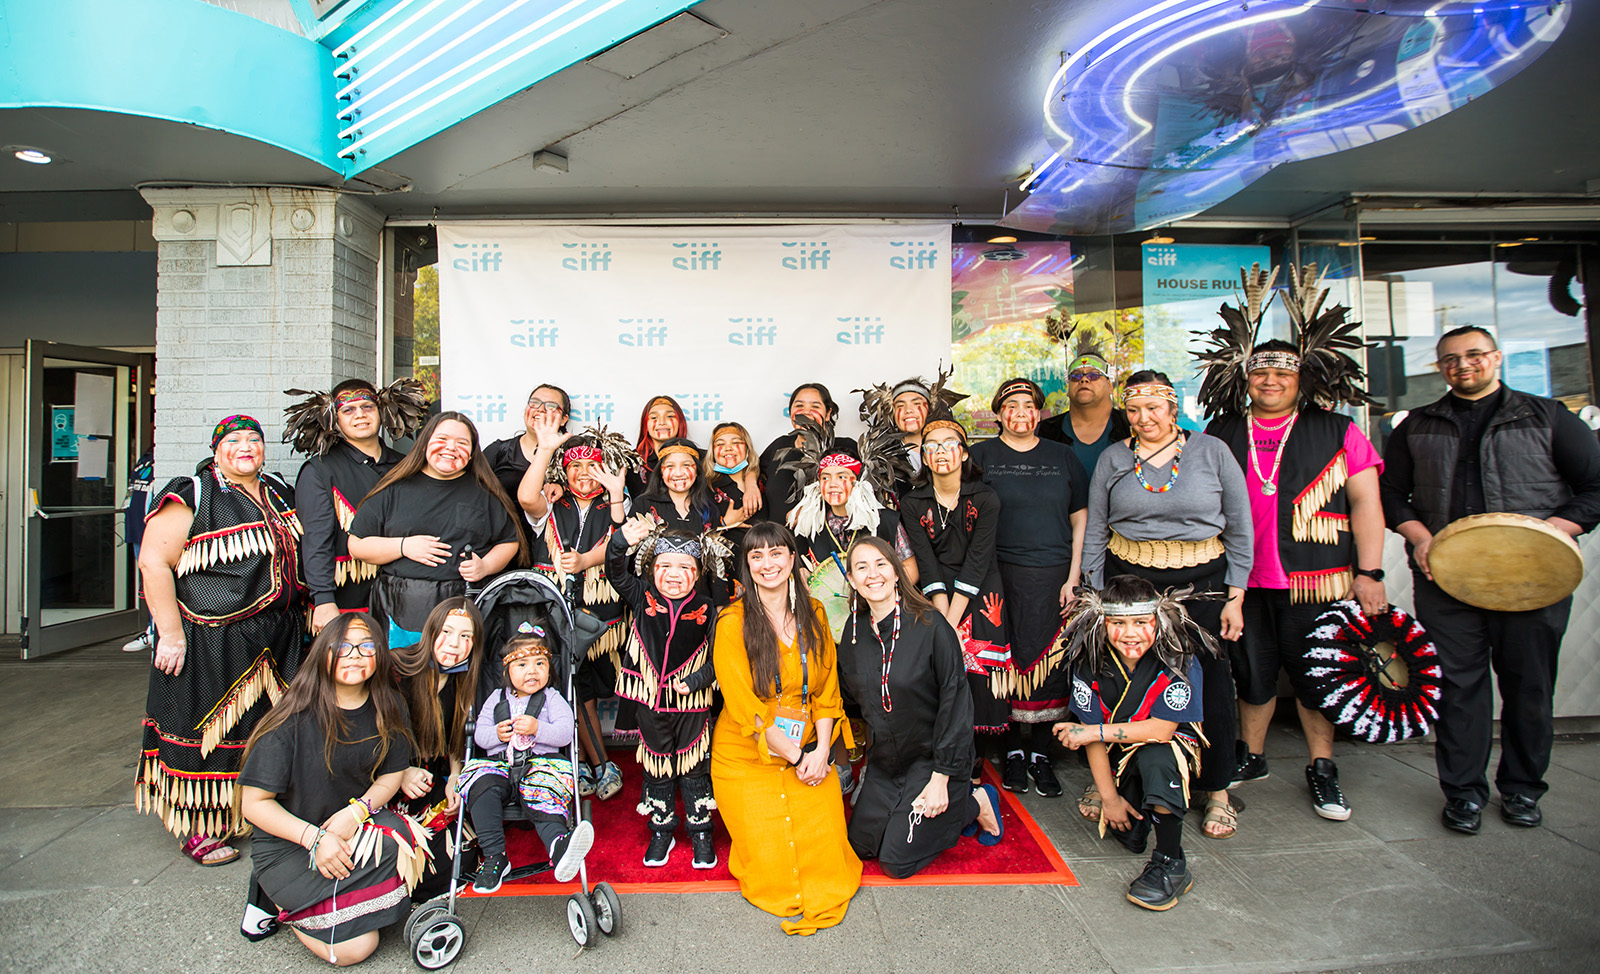 Director, Brooke Pepion Swaney, subjects, Kendra Mylnechuk and Lhaq'temish, the Lummi People, pose on the red carpet before the screening of their film, Daughter of a Lost Bird